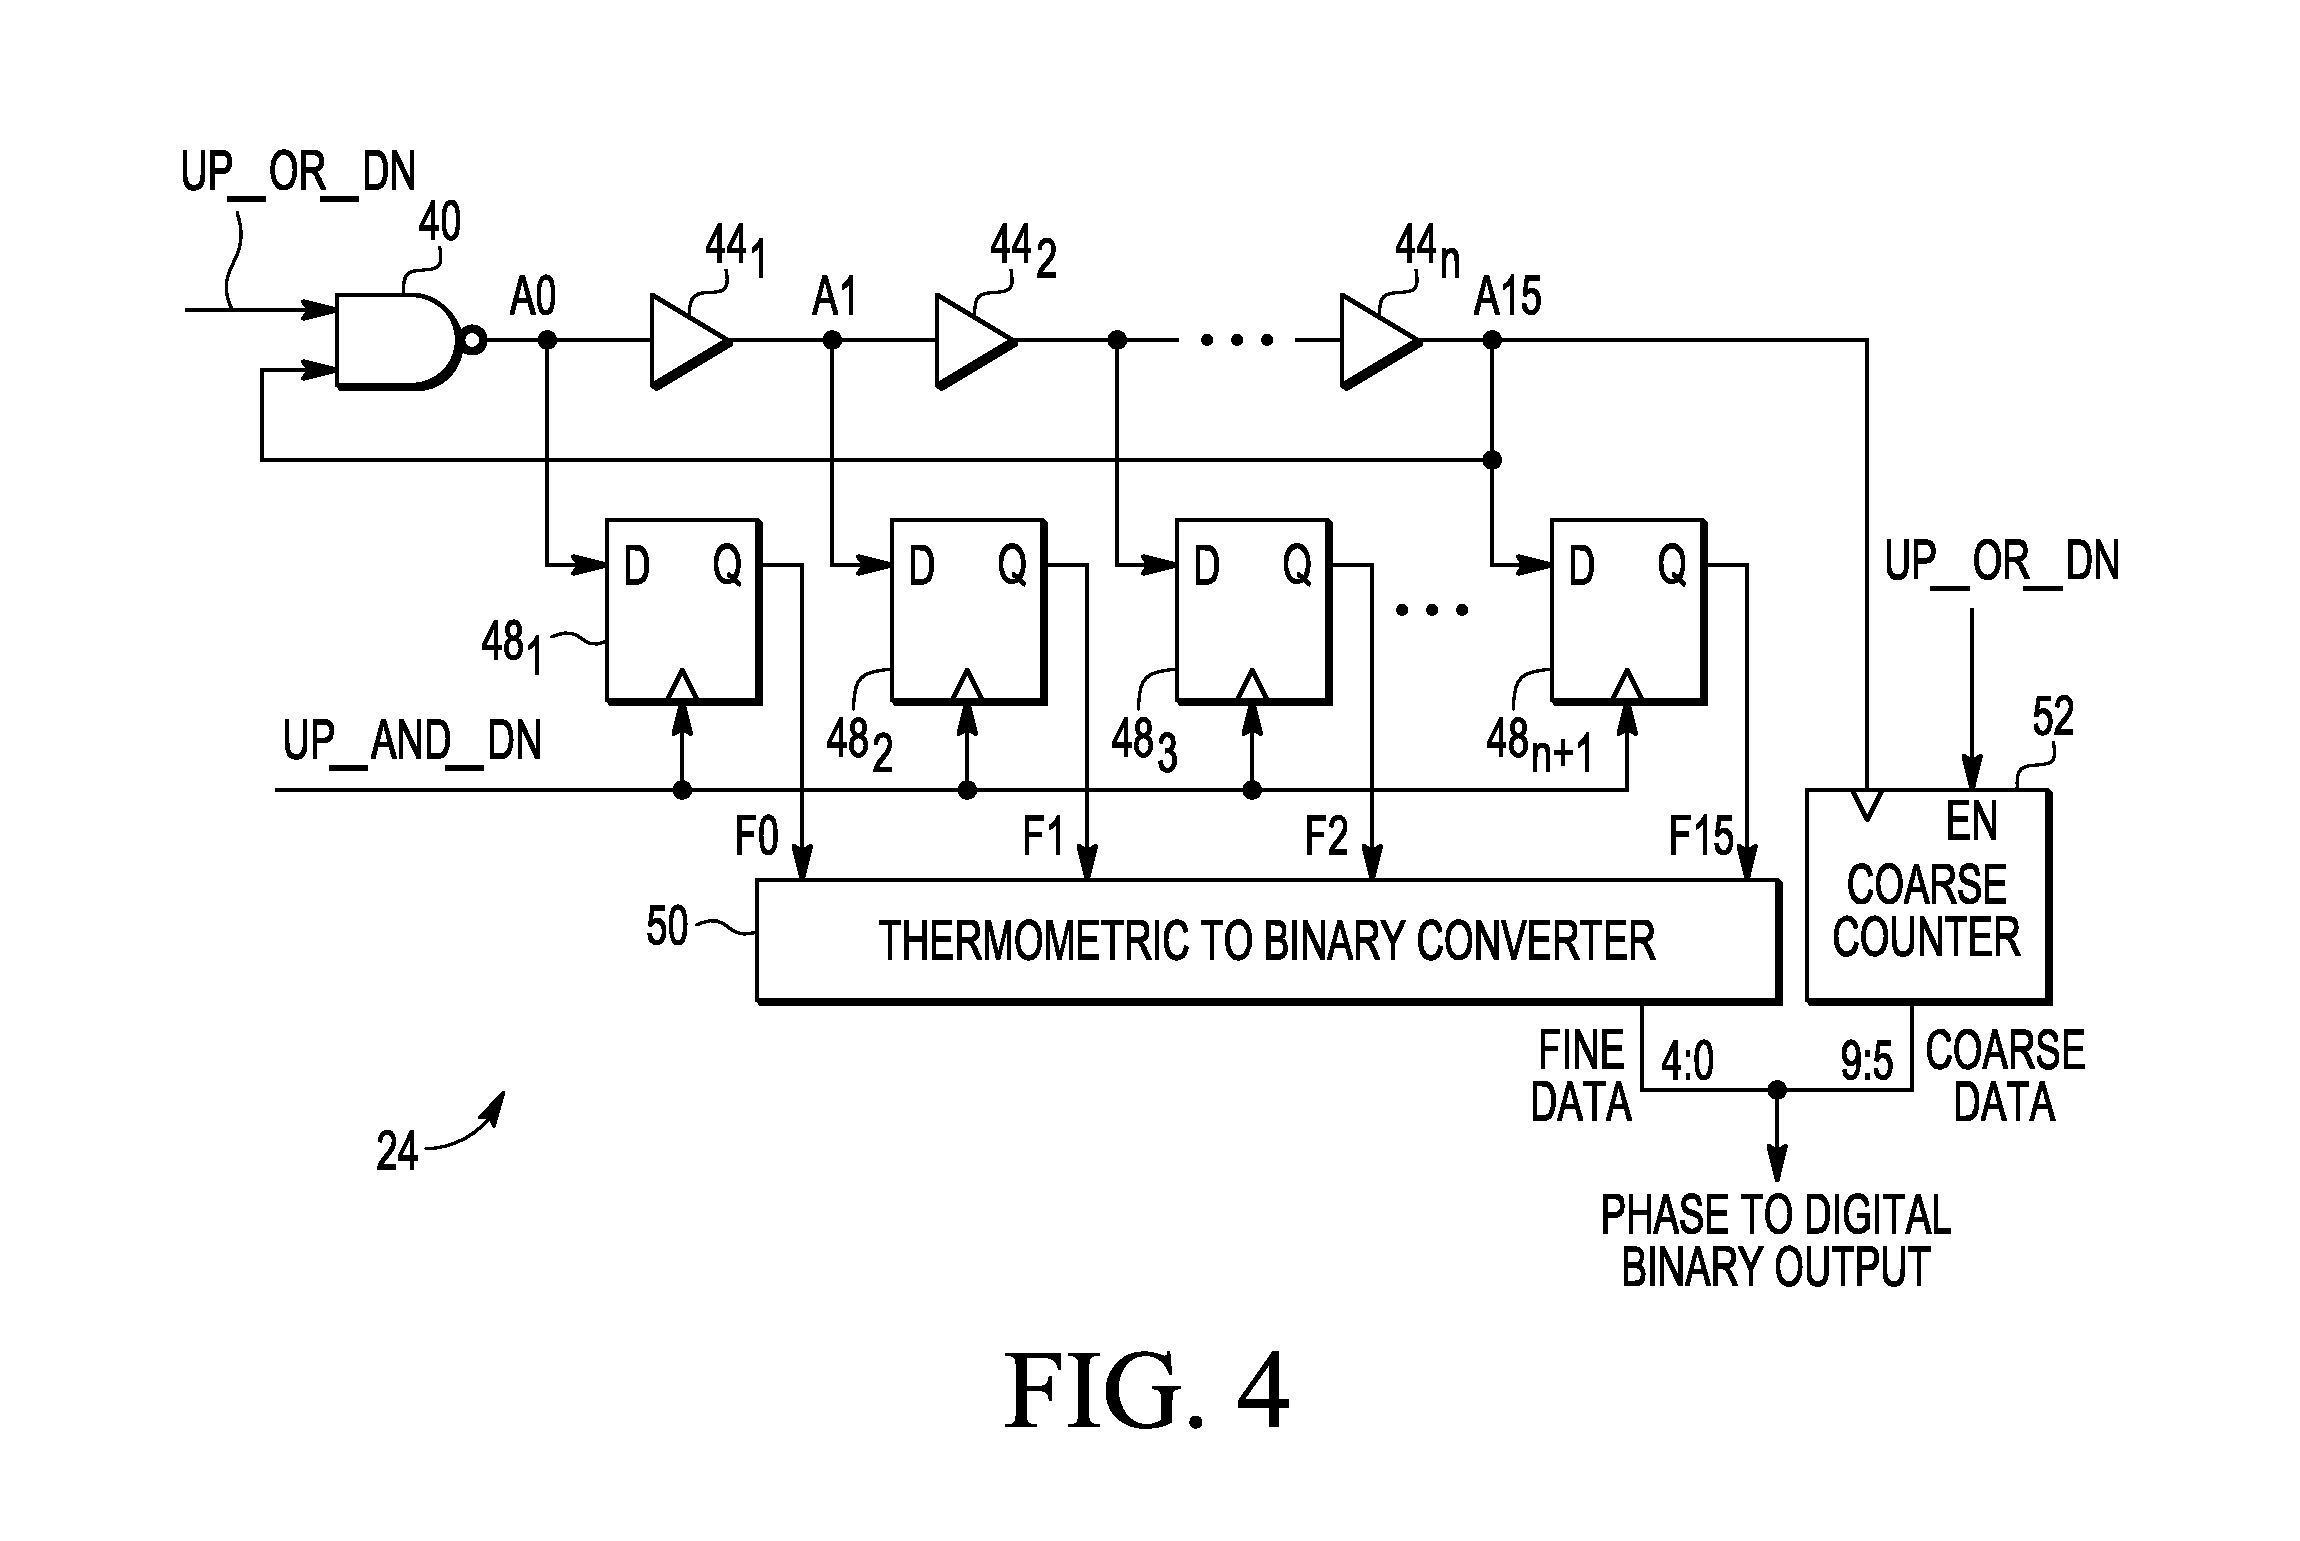 Single period phase to digital converter